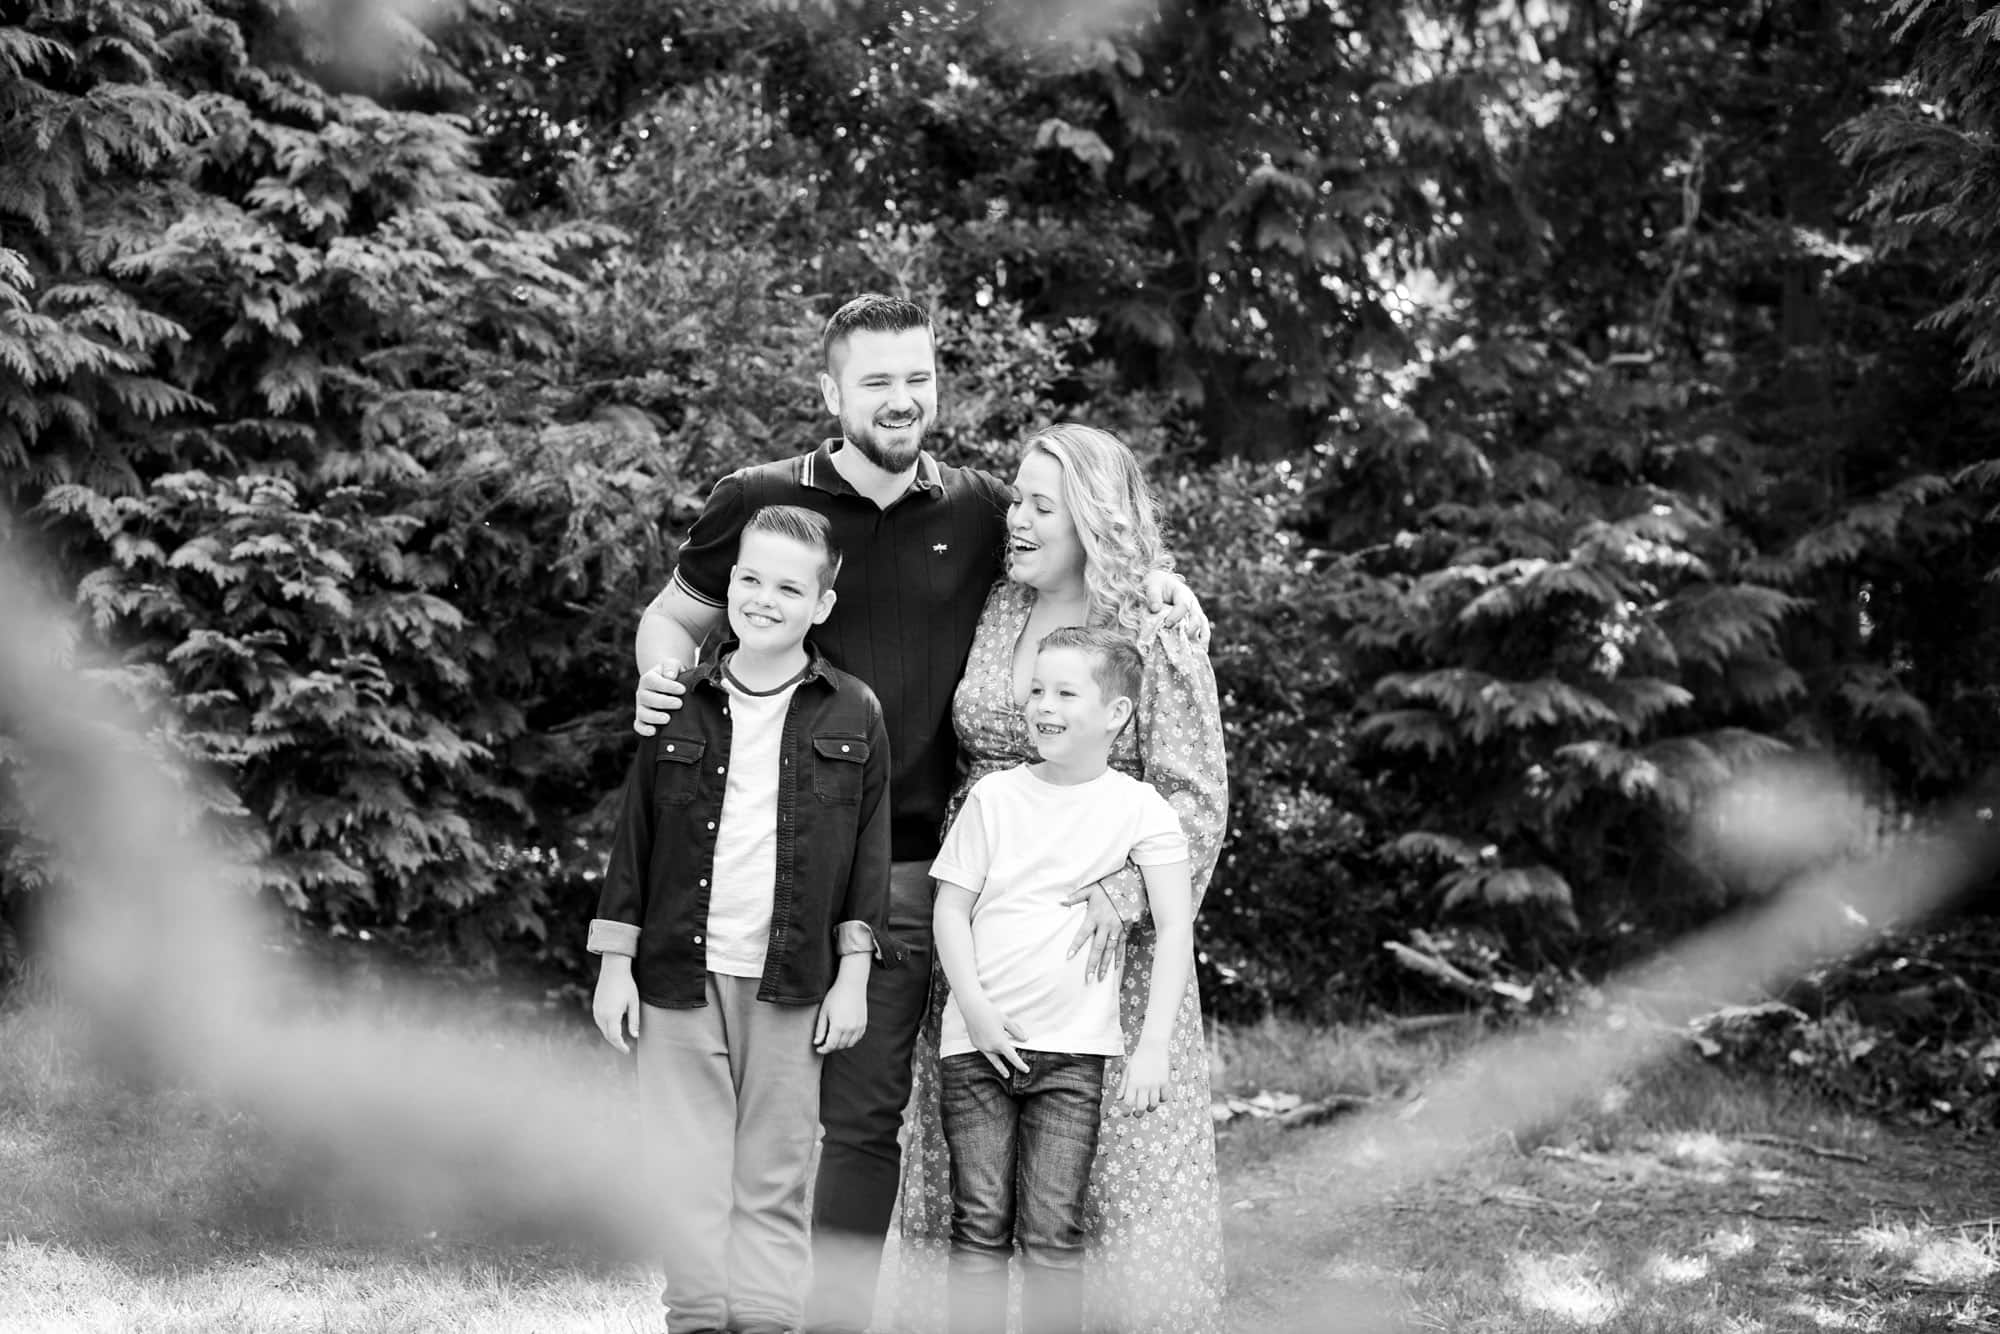 Family in black and white photo in park laughing in Bromley family photoshoot